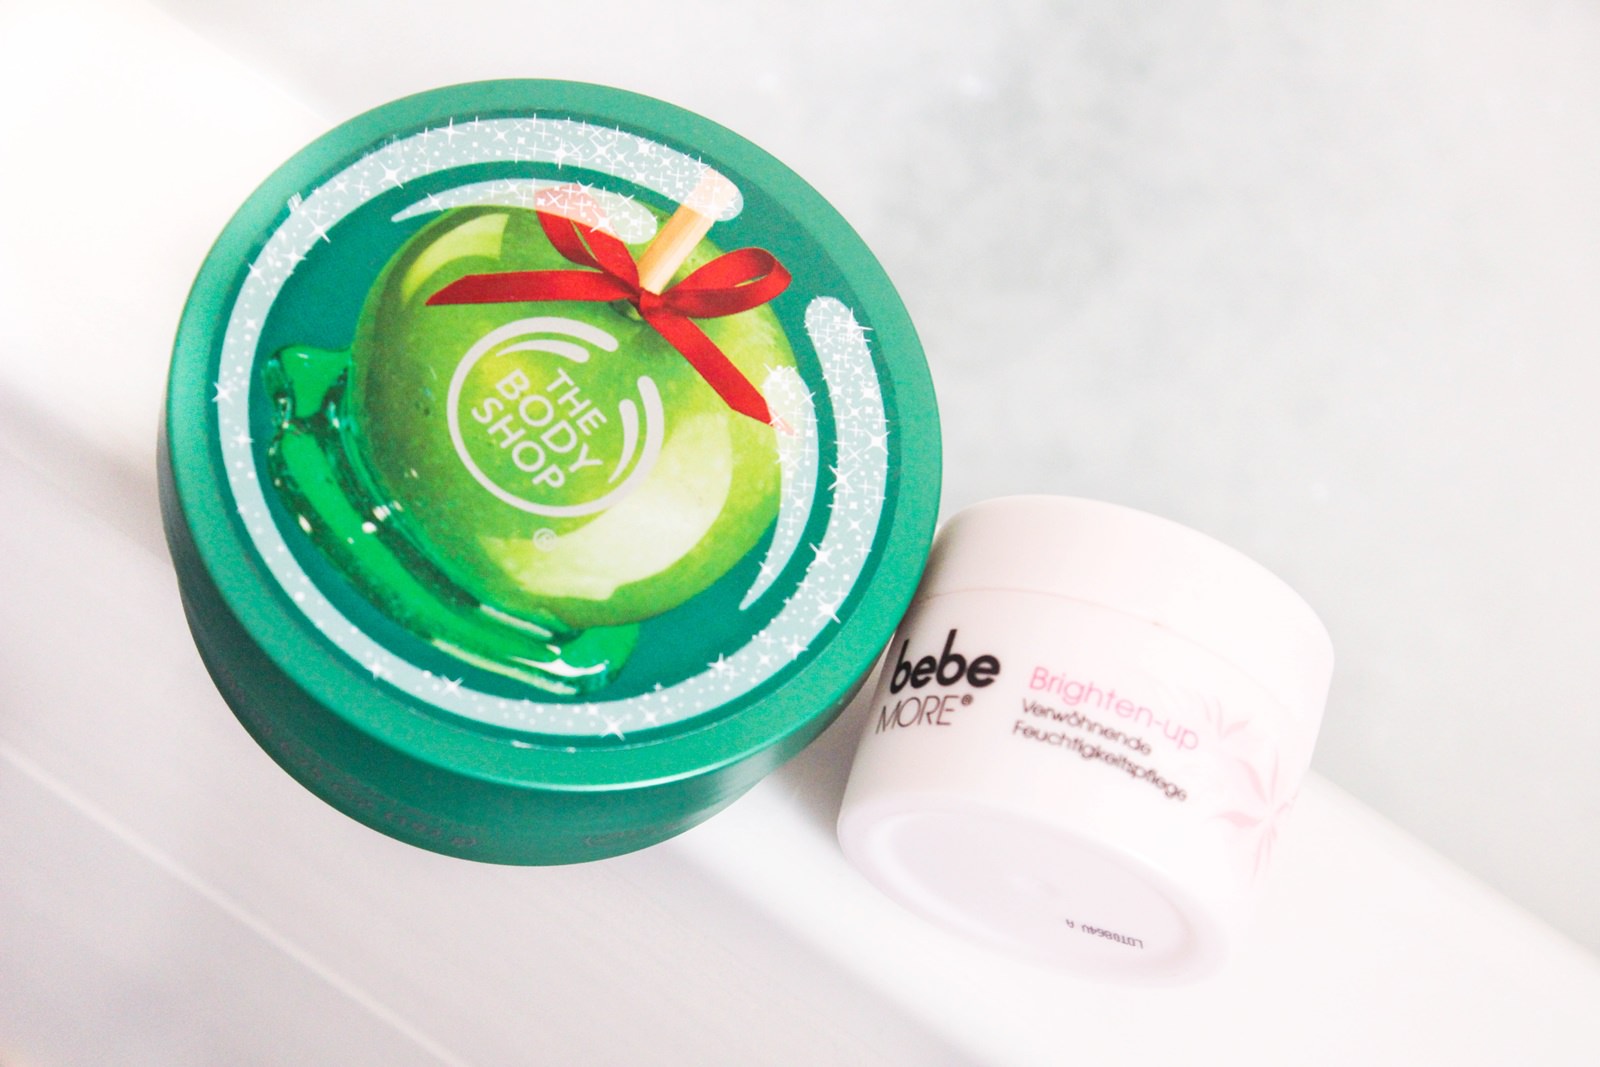 The Body Shop Candy Apple Bebe More